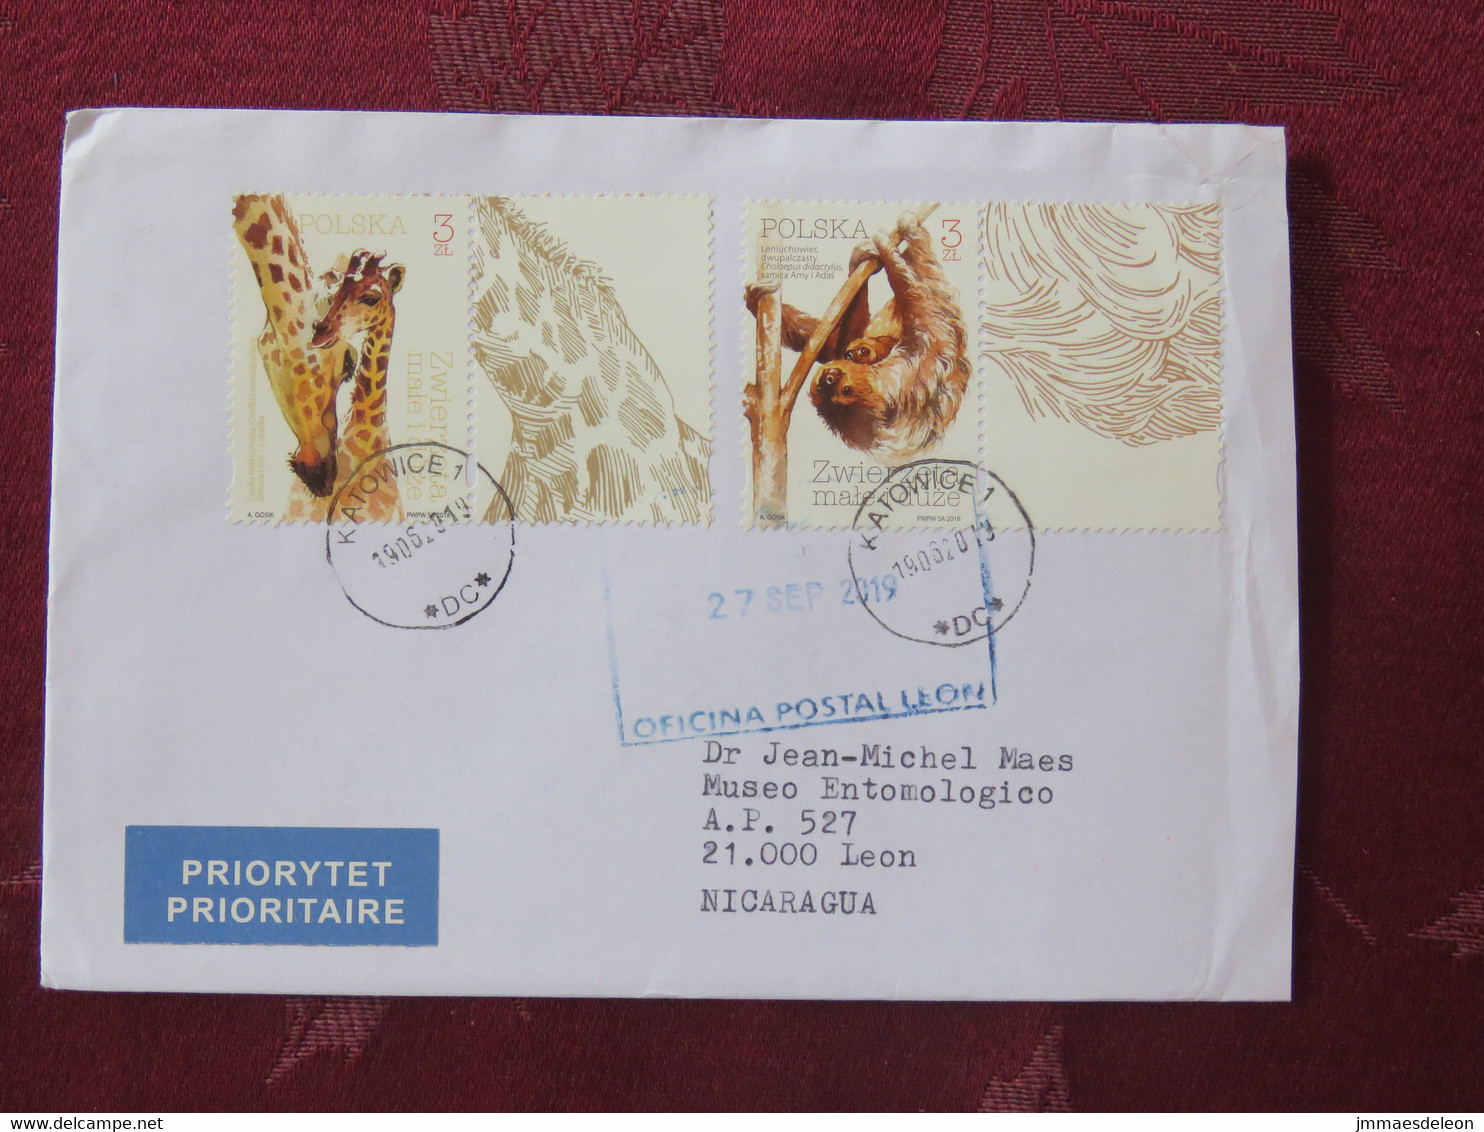 Poland 2019 Cover To Nicaragua - Animals Sloth Giraffe - Covers & Documents